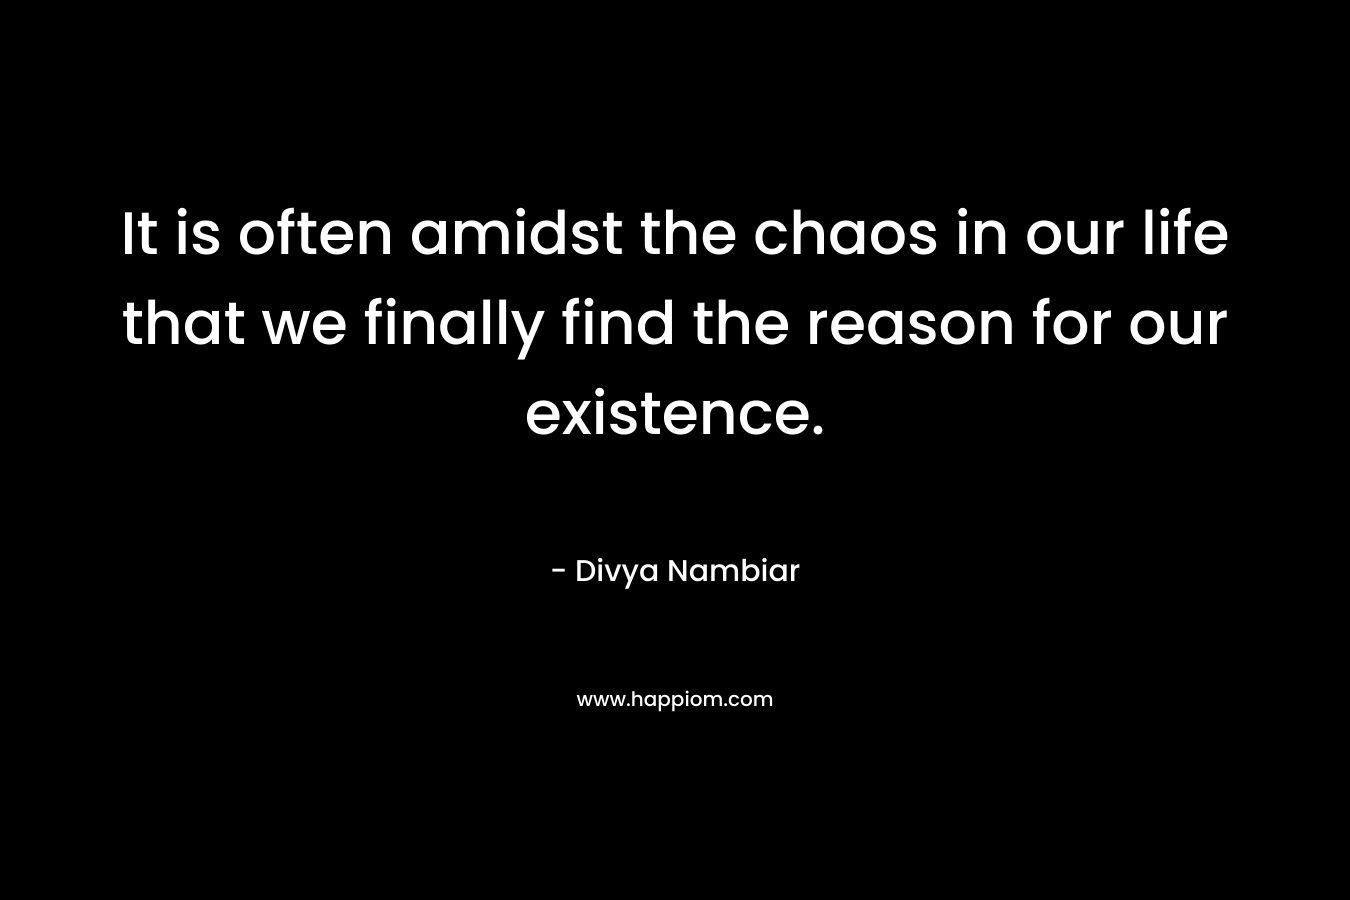 It is often amidst the chaos in our life that we finally find the reason for our existence.